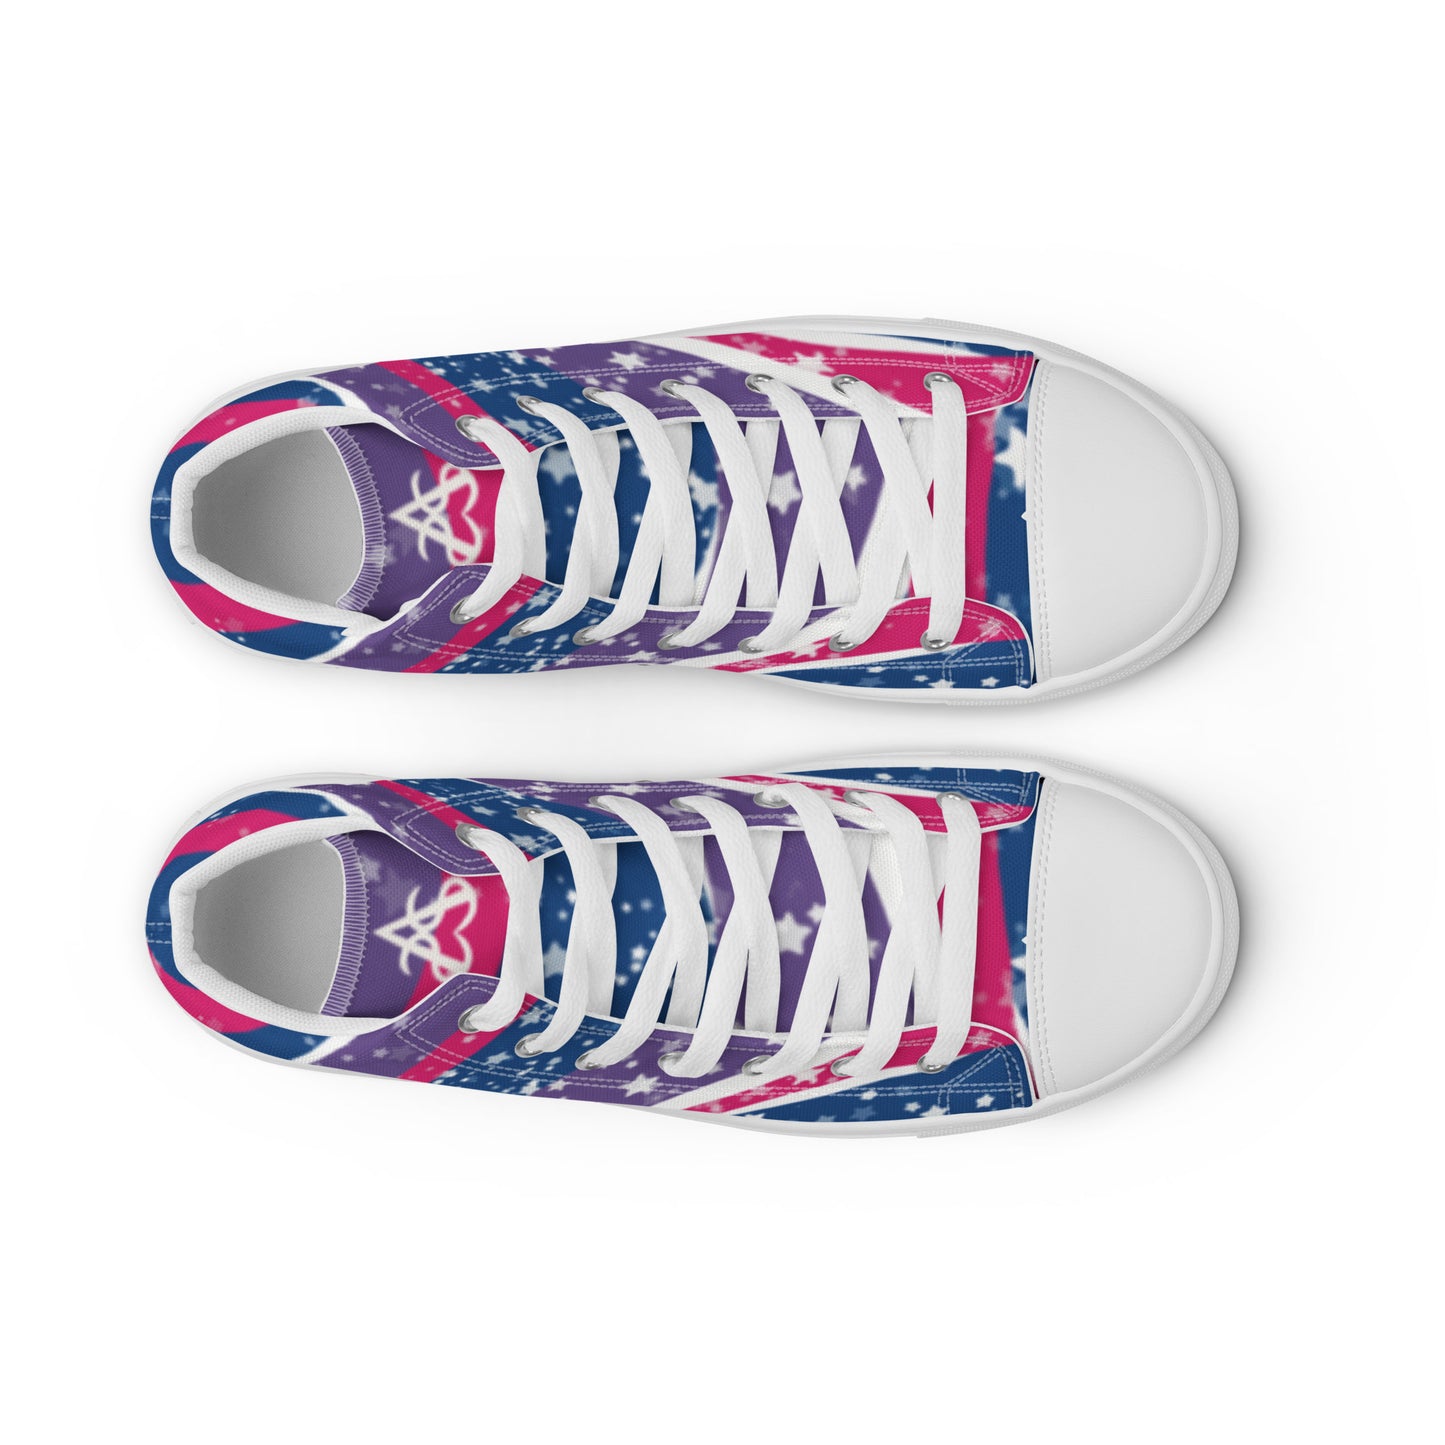 Top view: a pair of high top shoes with pink, purple, and blue ribbons that get larger from heel to laces, white stars, and the Aras Sivad logo on the tongue.